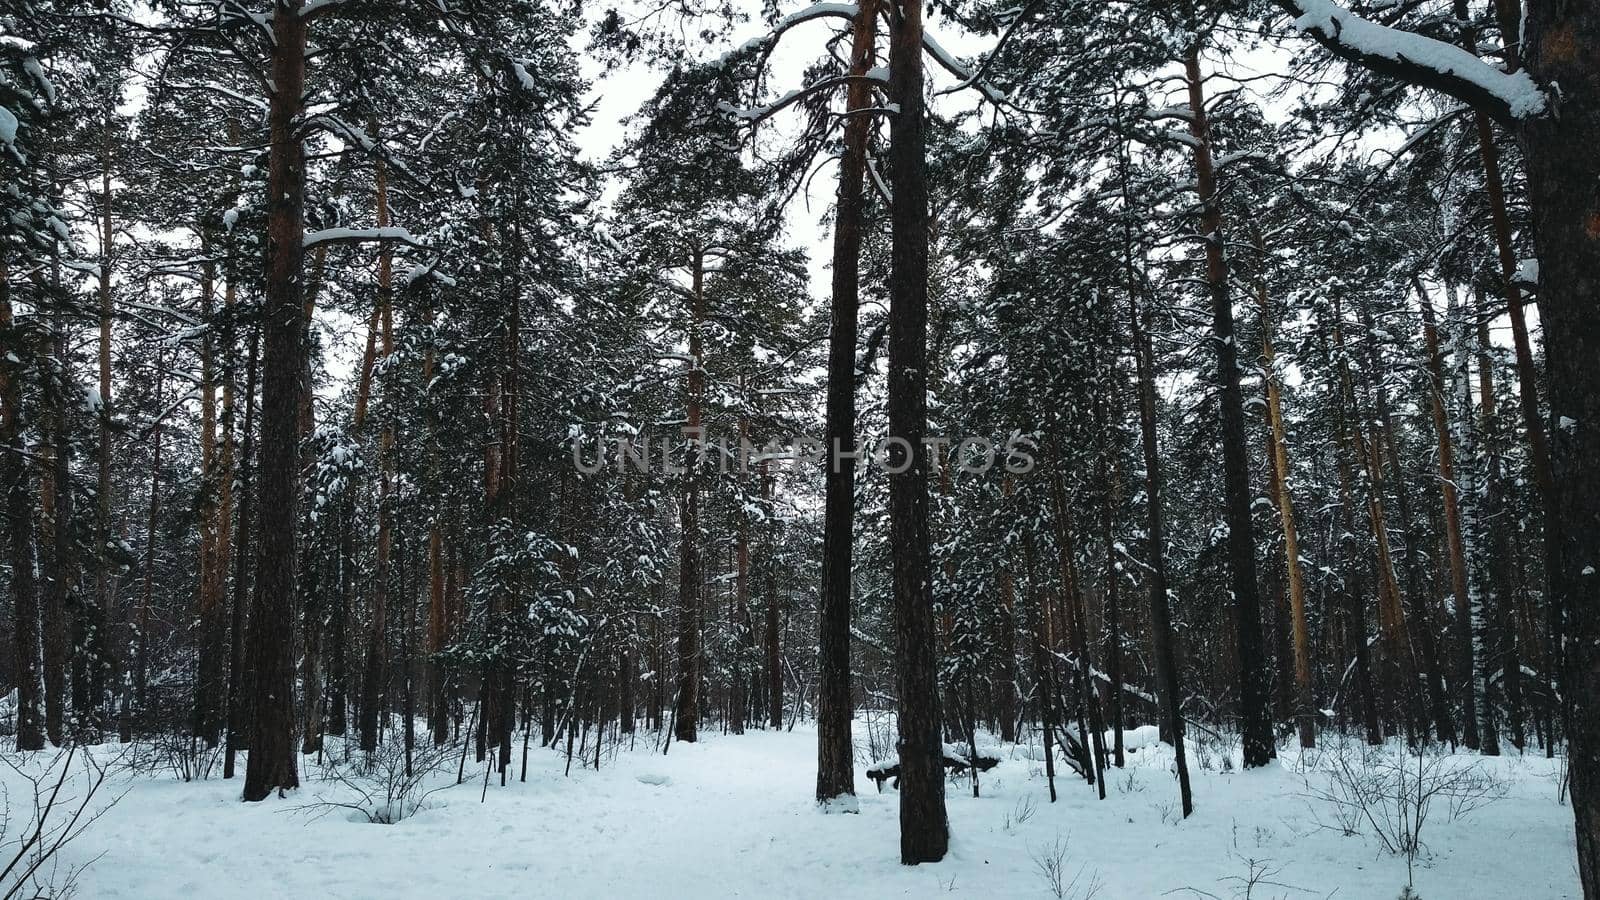 The trail between trees in winter in the coniferous forest